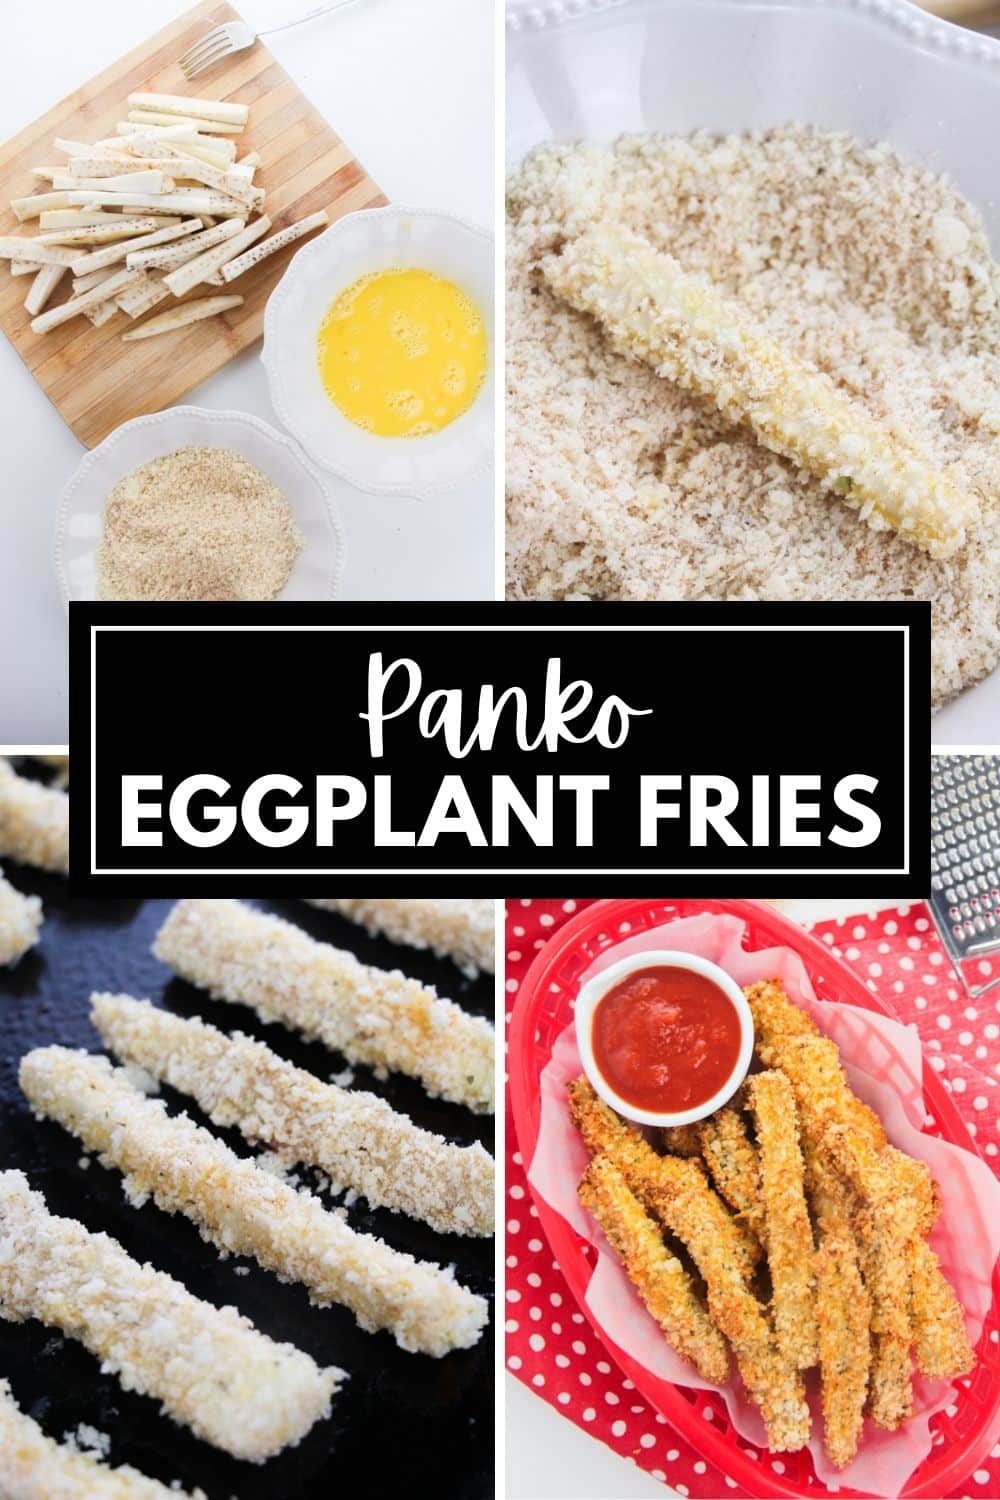 Panko Eggplant Fries are a delicious and crispy snack made from thinly sliced eggplant coated in a golden panko breadcrumb crust. These fries are the perfect combination of crunchy, flavorful, and healthy